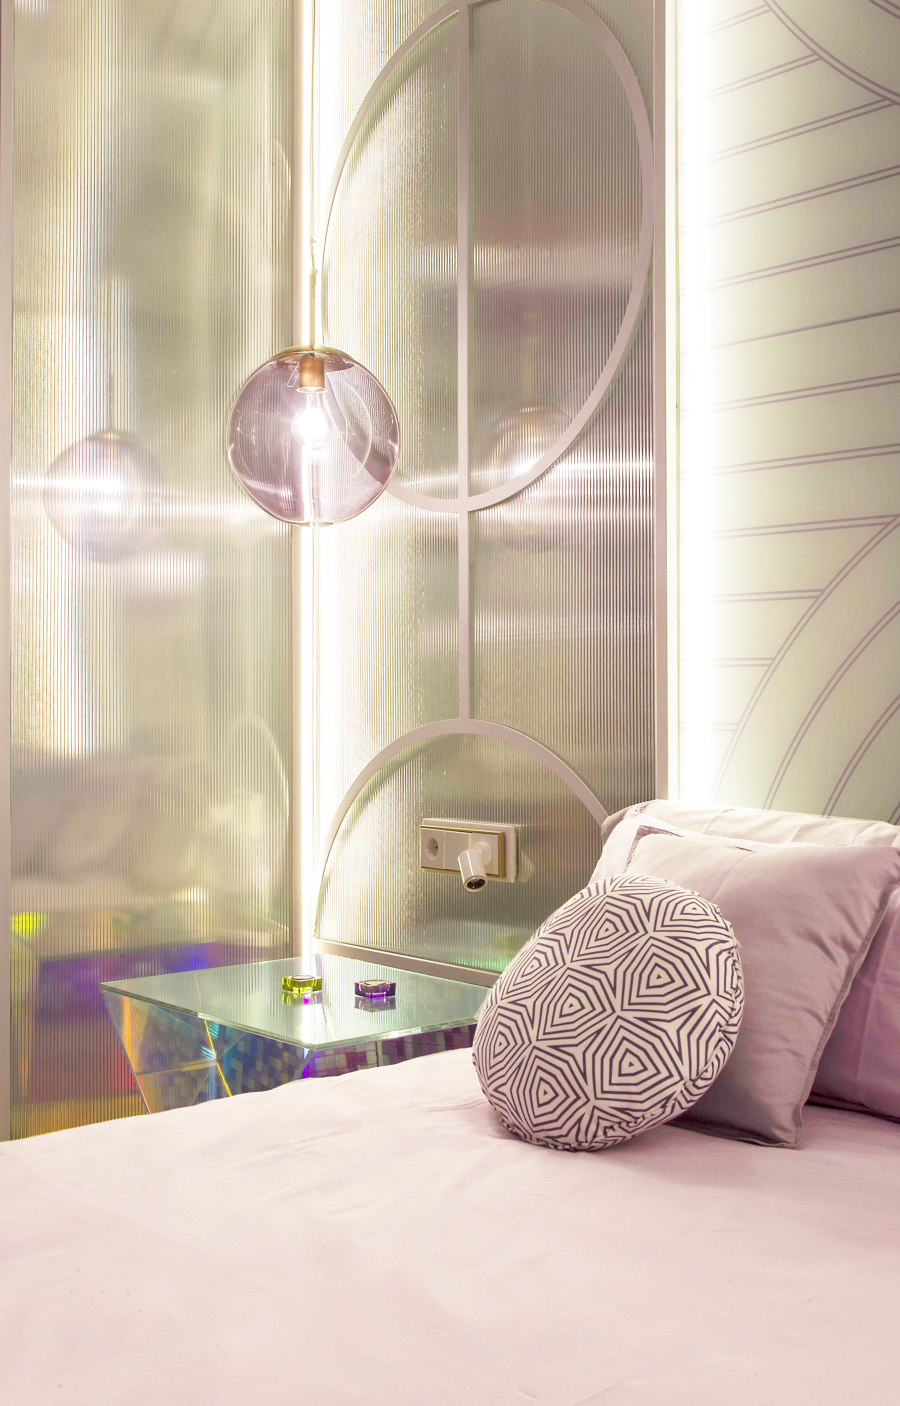 Violet BlissSuite by In Out Studio | Hotel interiors